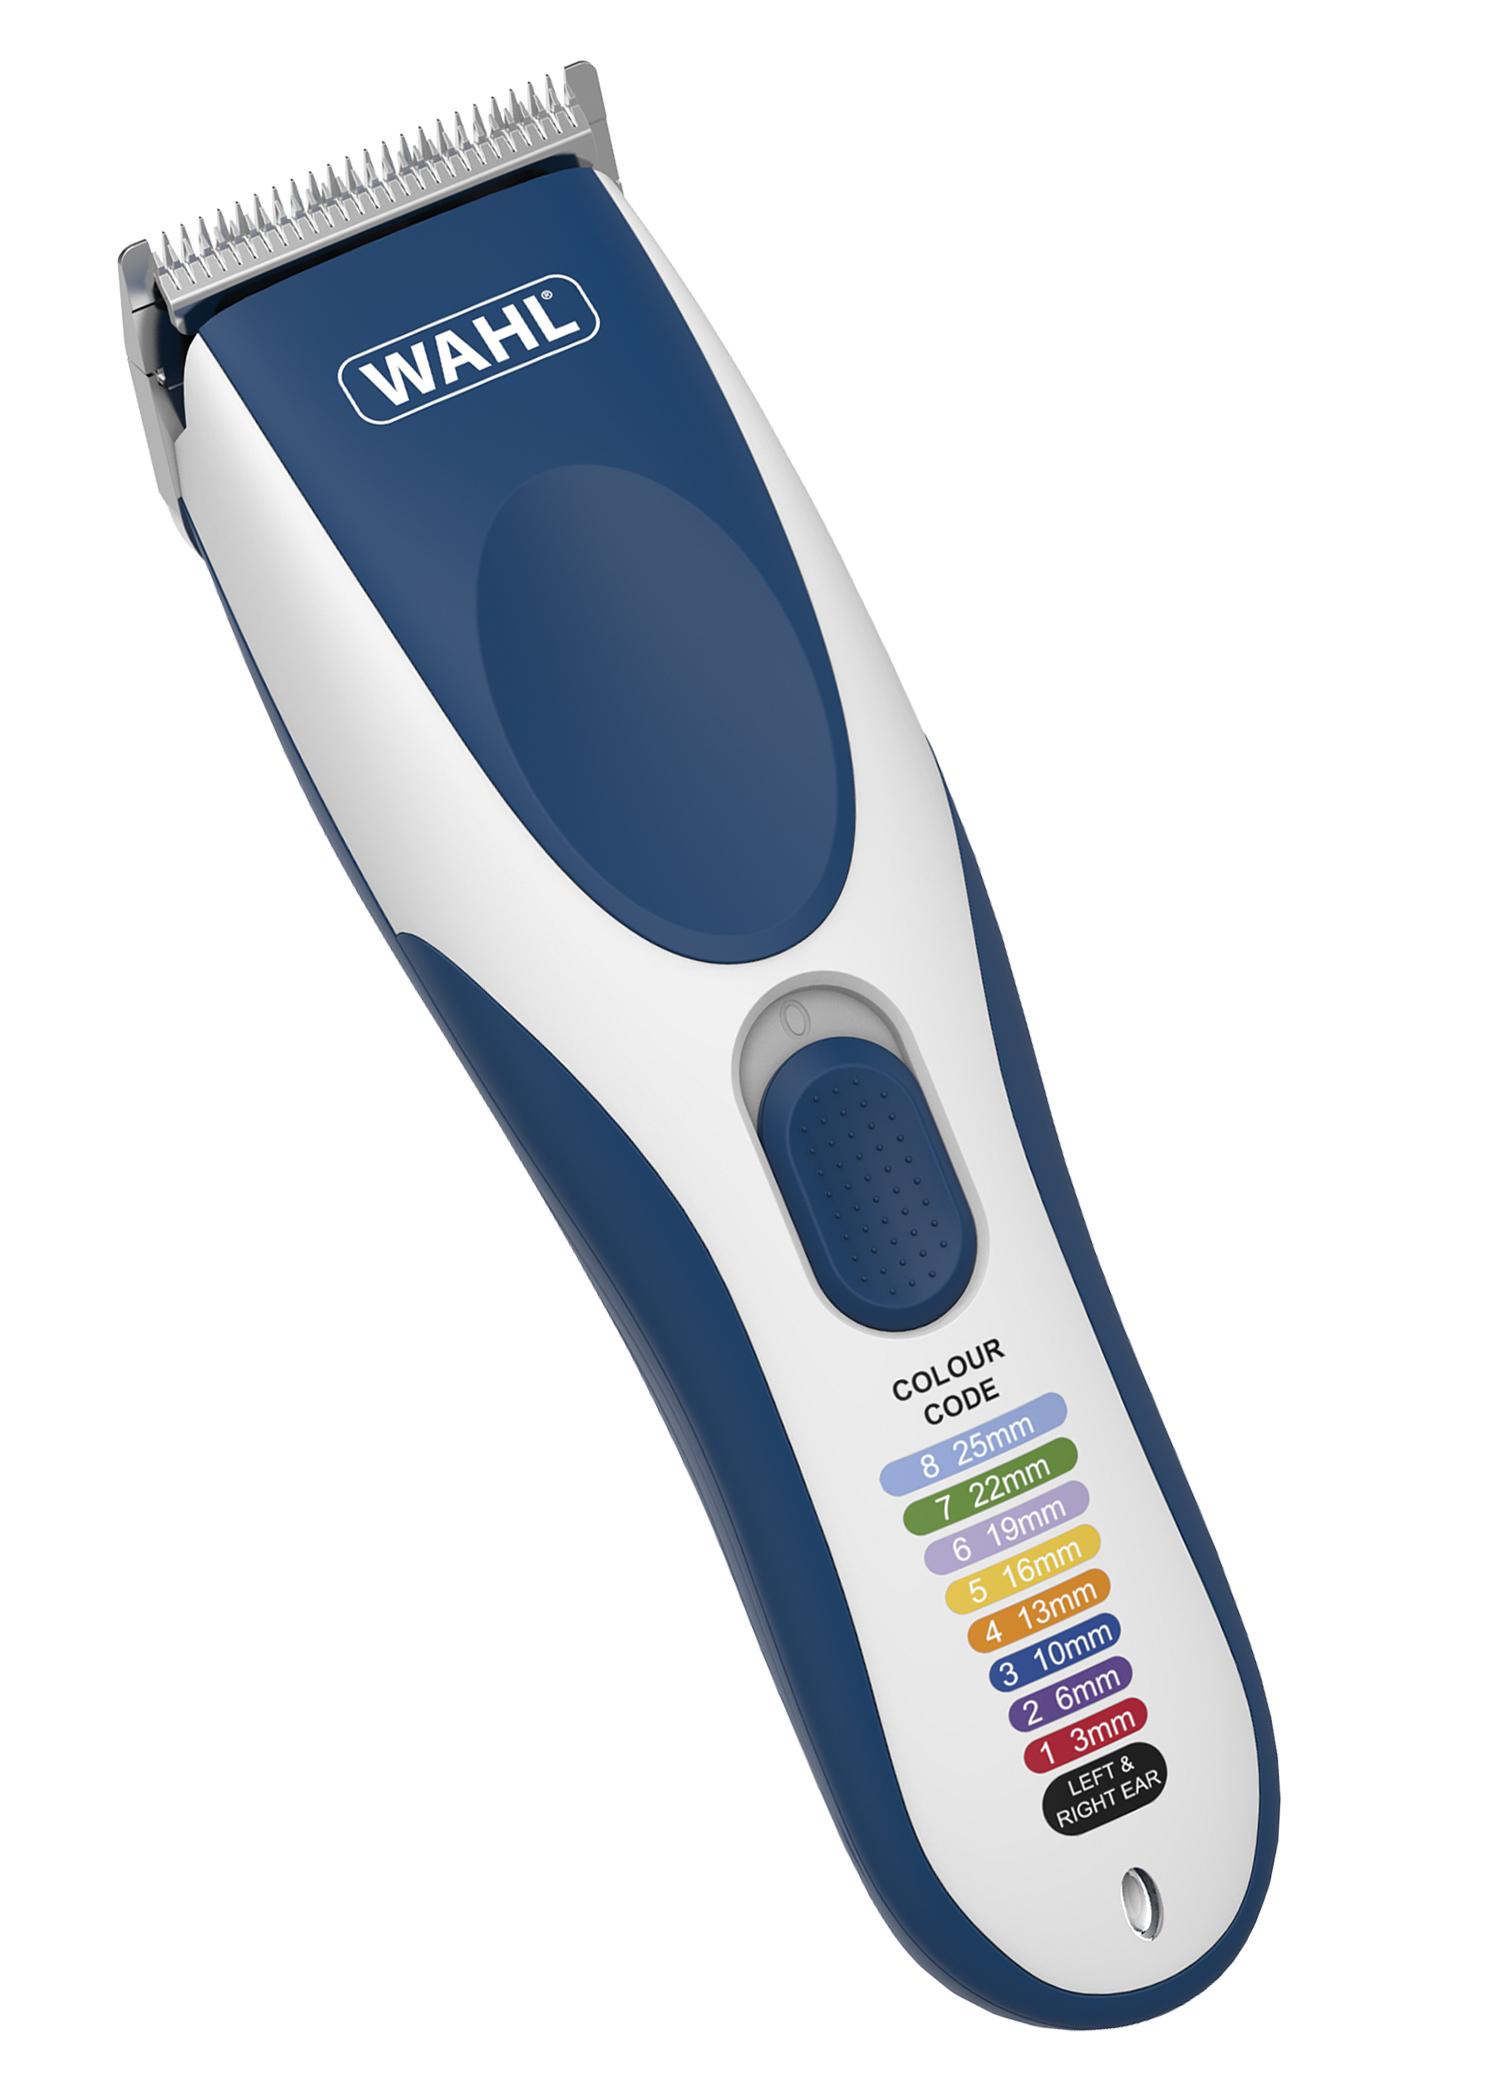 wahl hair clippers battery operated